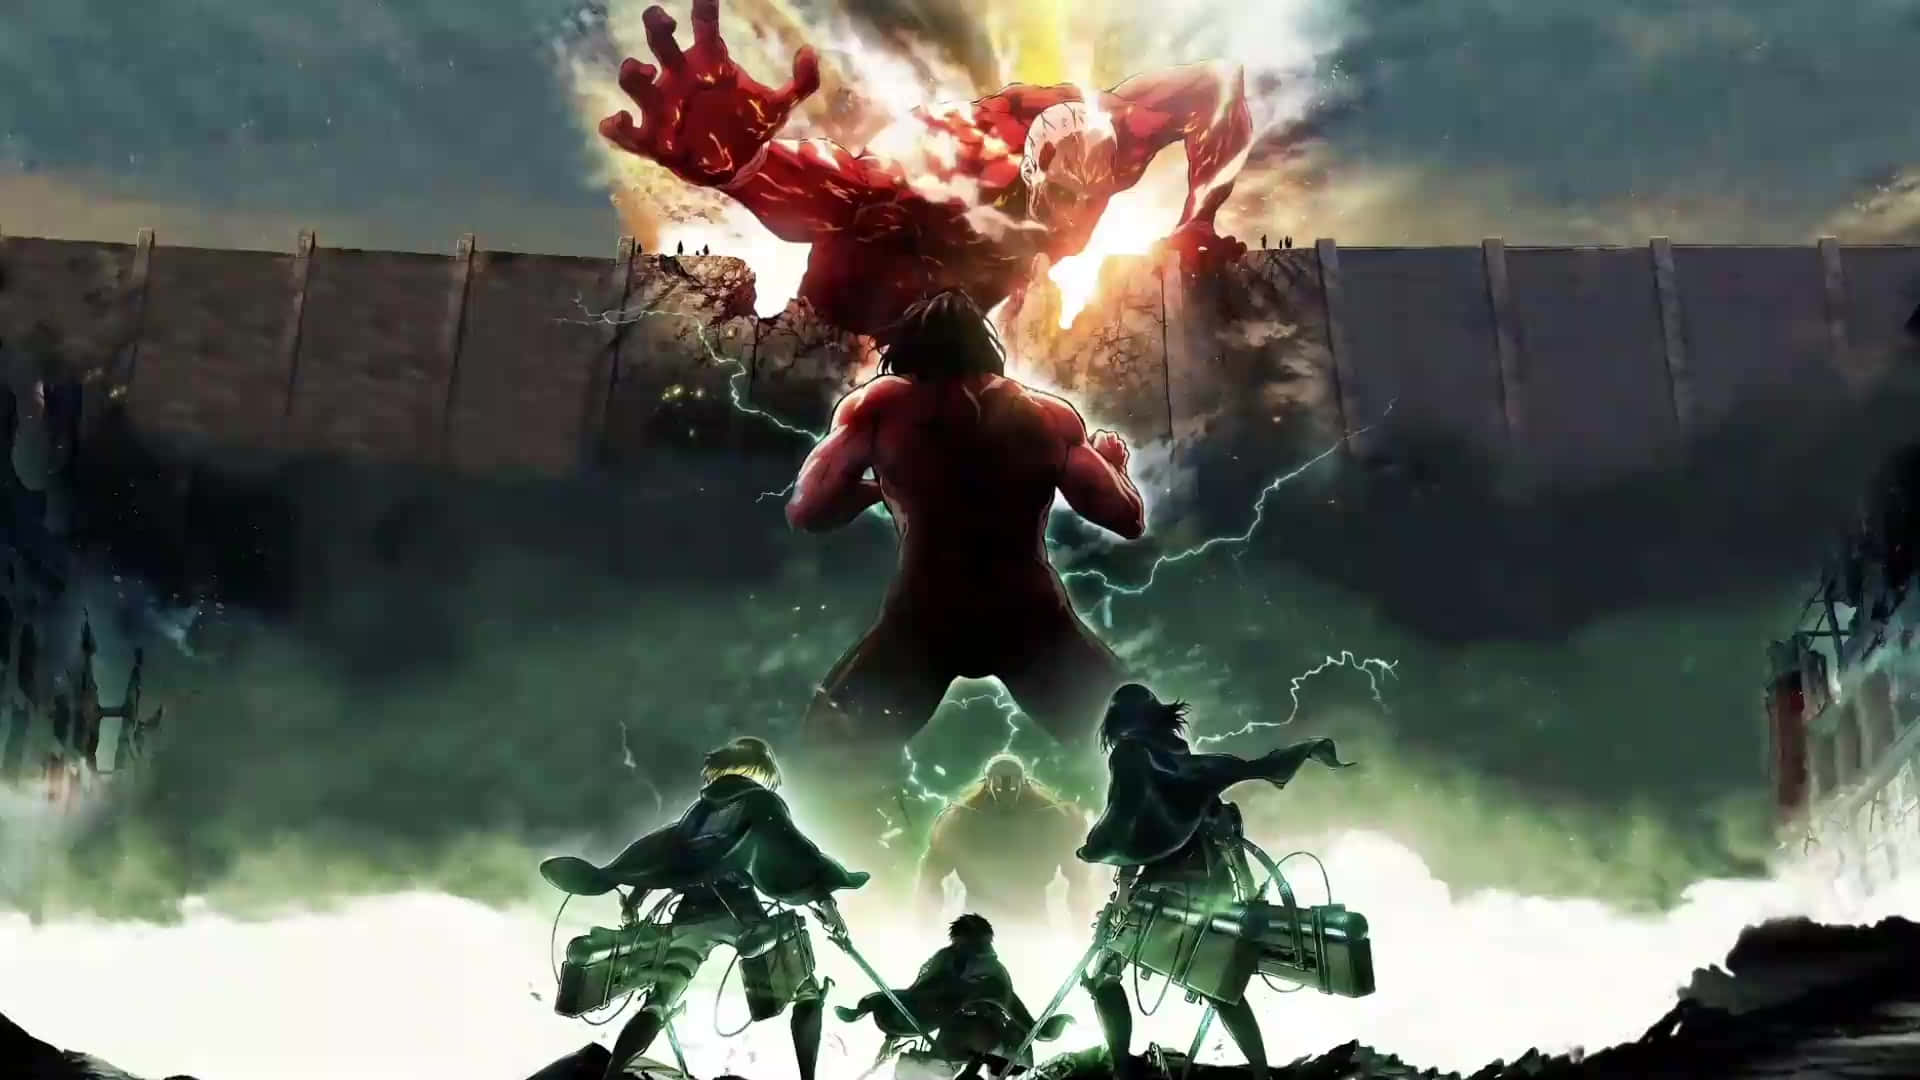 Journey to save humanity in Attack On Titan Video Game! Wallpaper